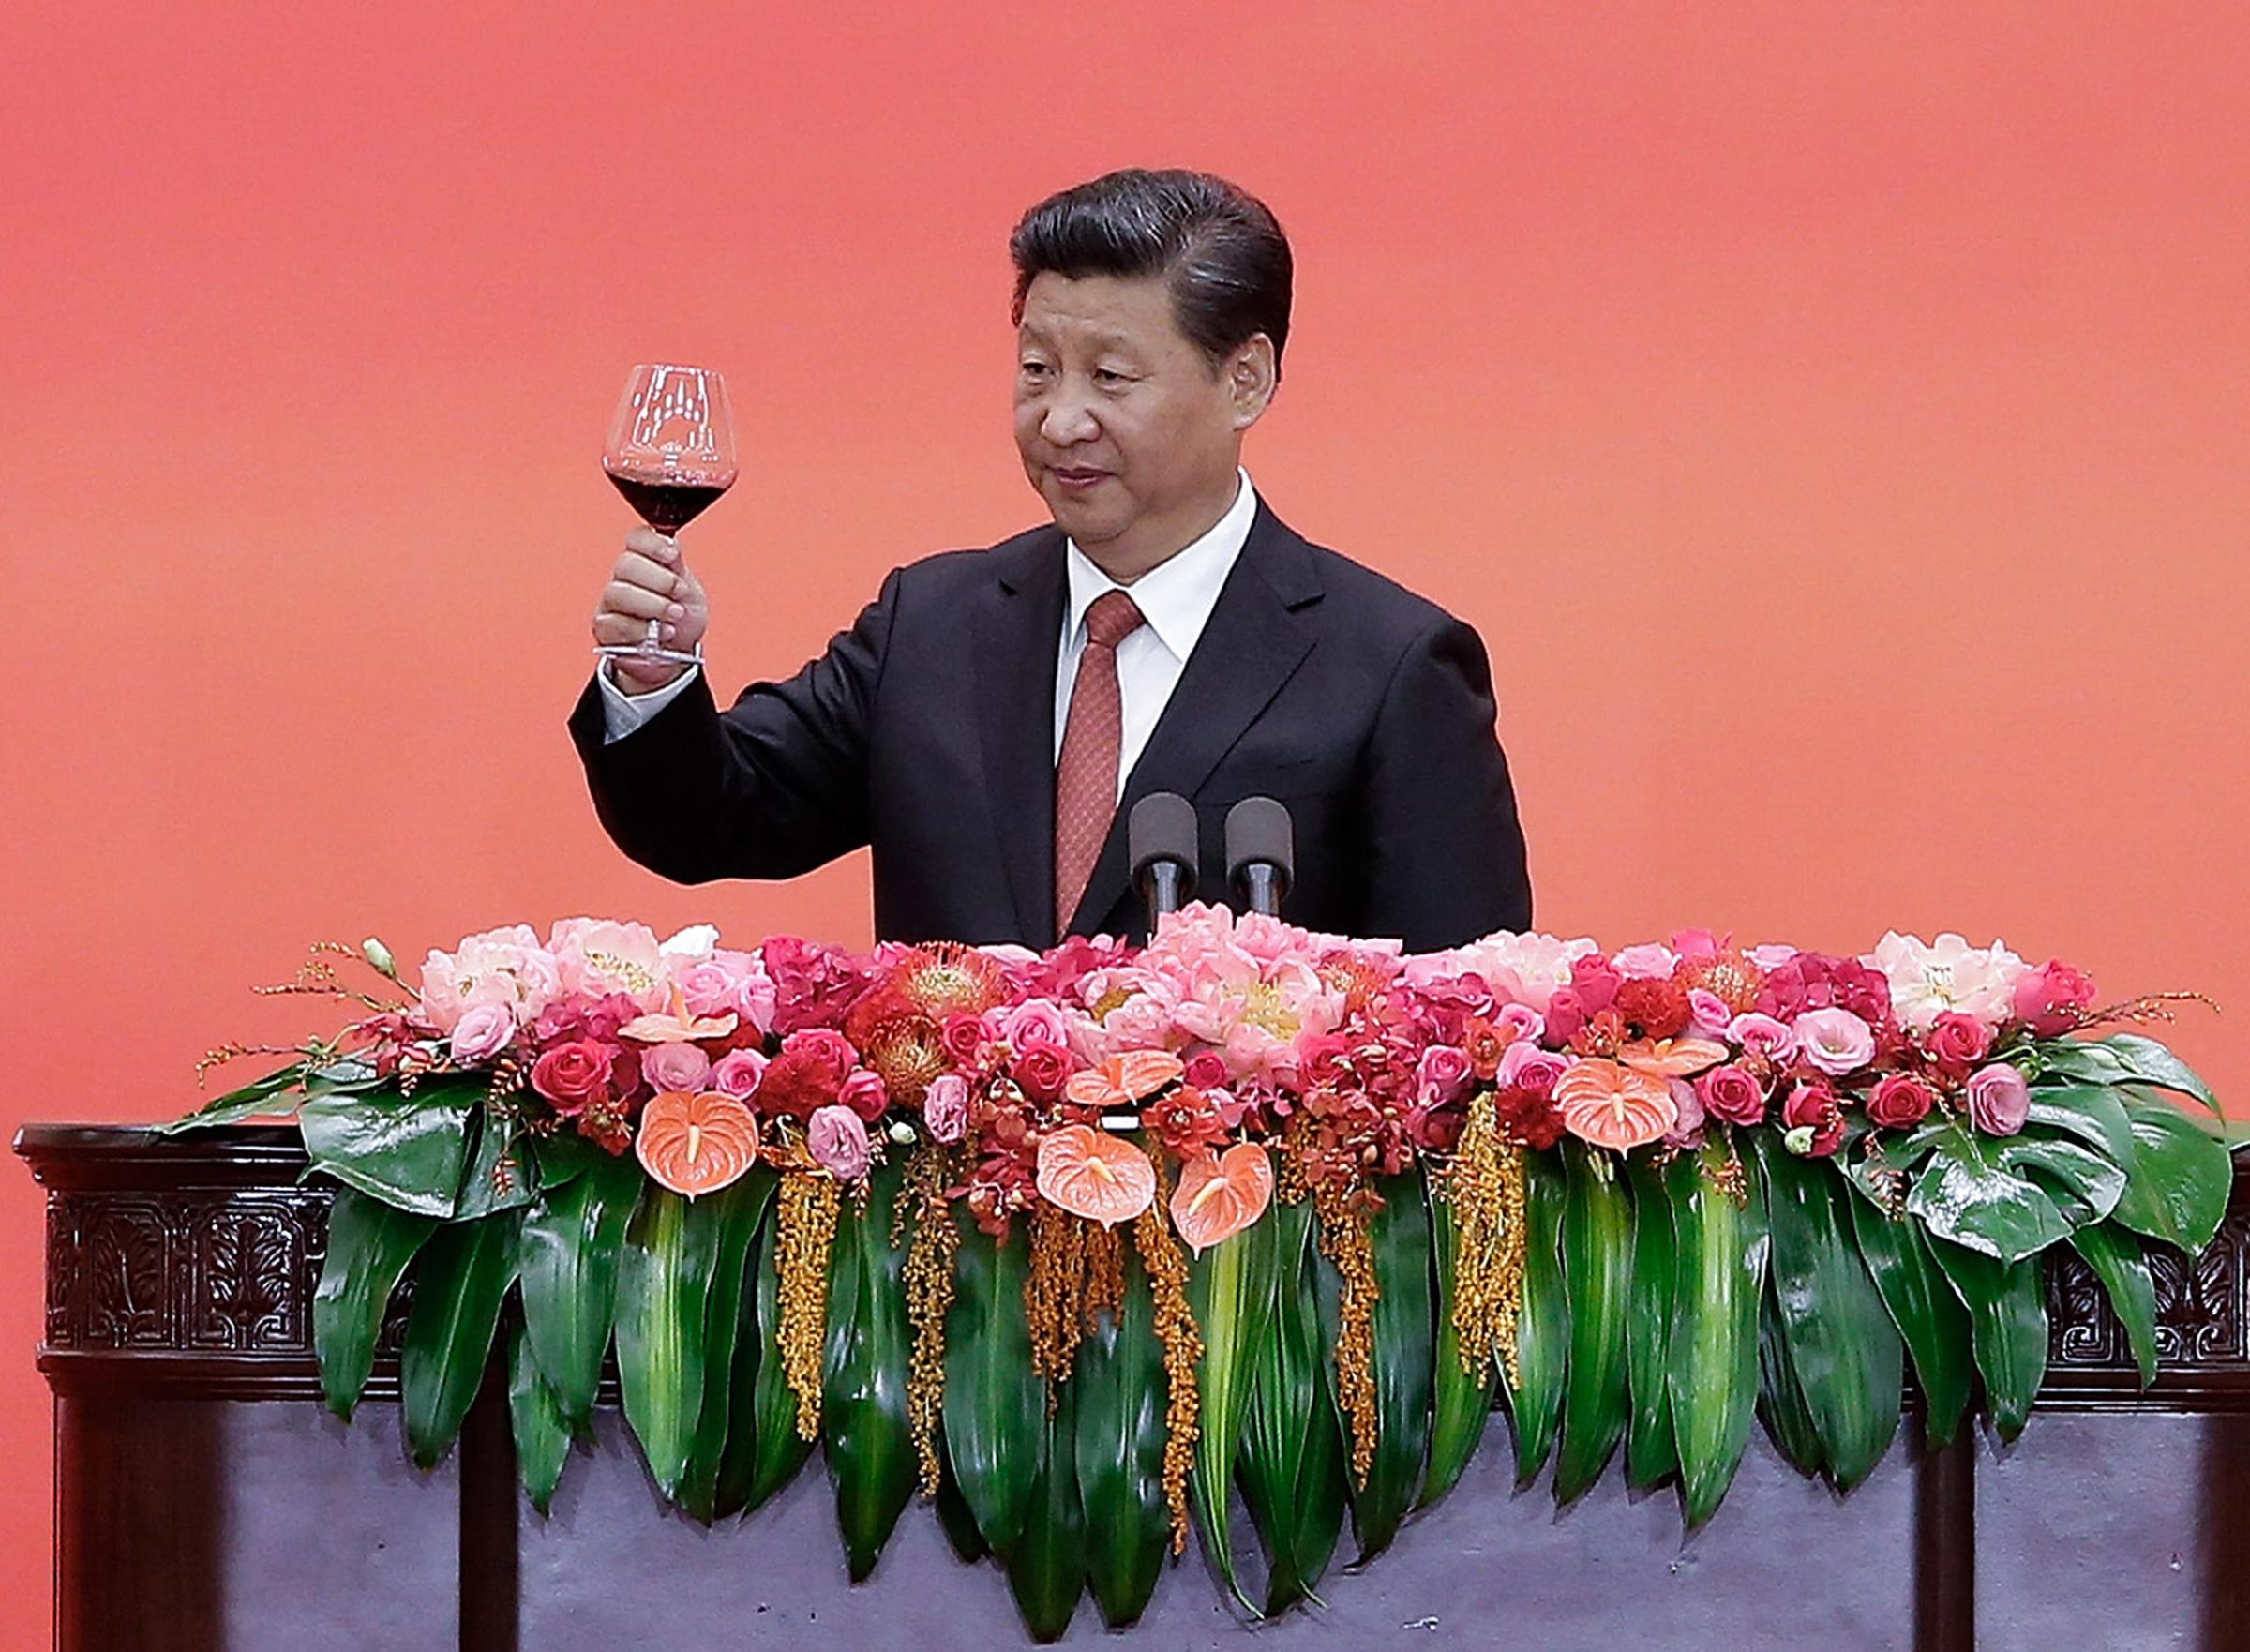 Chinese President Xi Jinping offers a toast after delivering a speech during a reception to mark the 70th anniversary of Japan's surrender during World War II in Beijing, Thursday, Sept. 3, 2015. (Lintao Zhang/Pool Photo via AP)